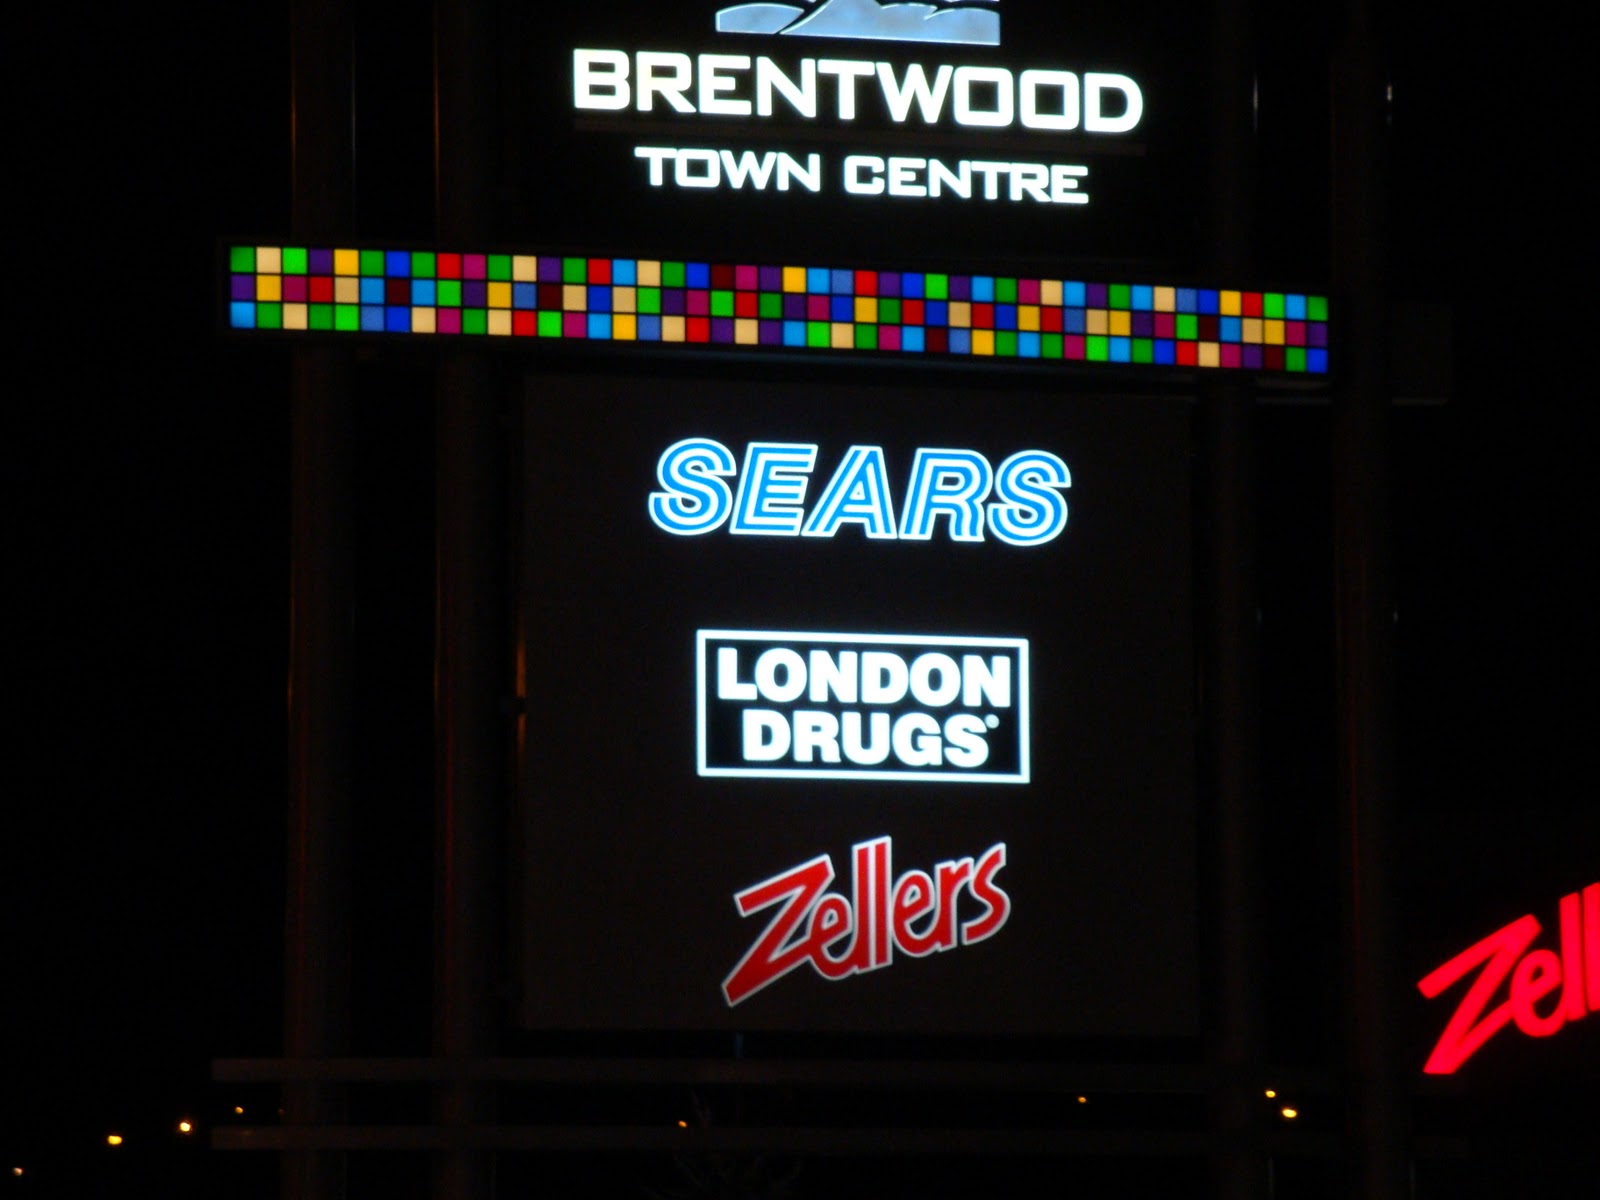 Brentwood Station Zellers location at Brentwood potentially to be sold